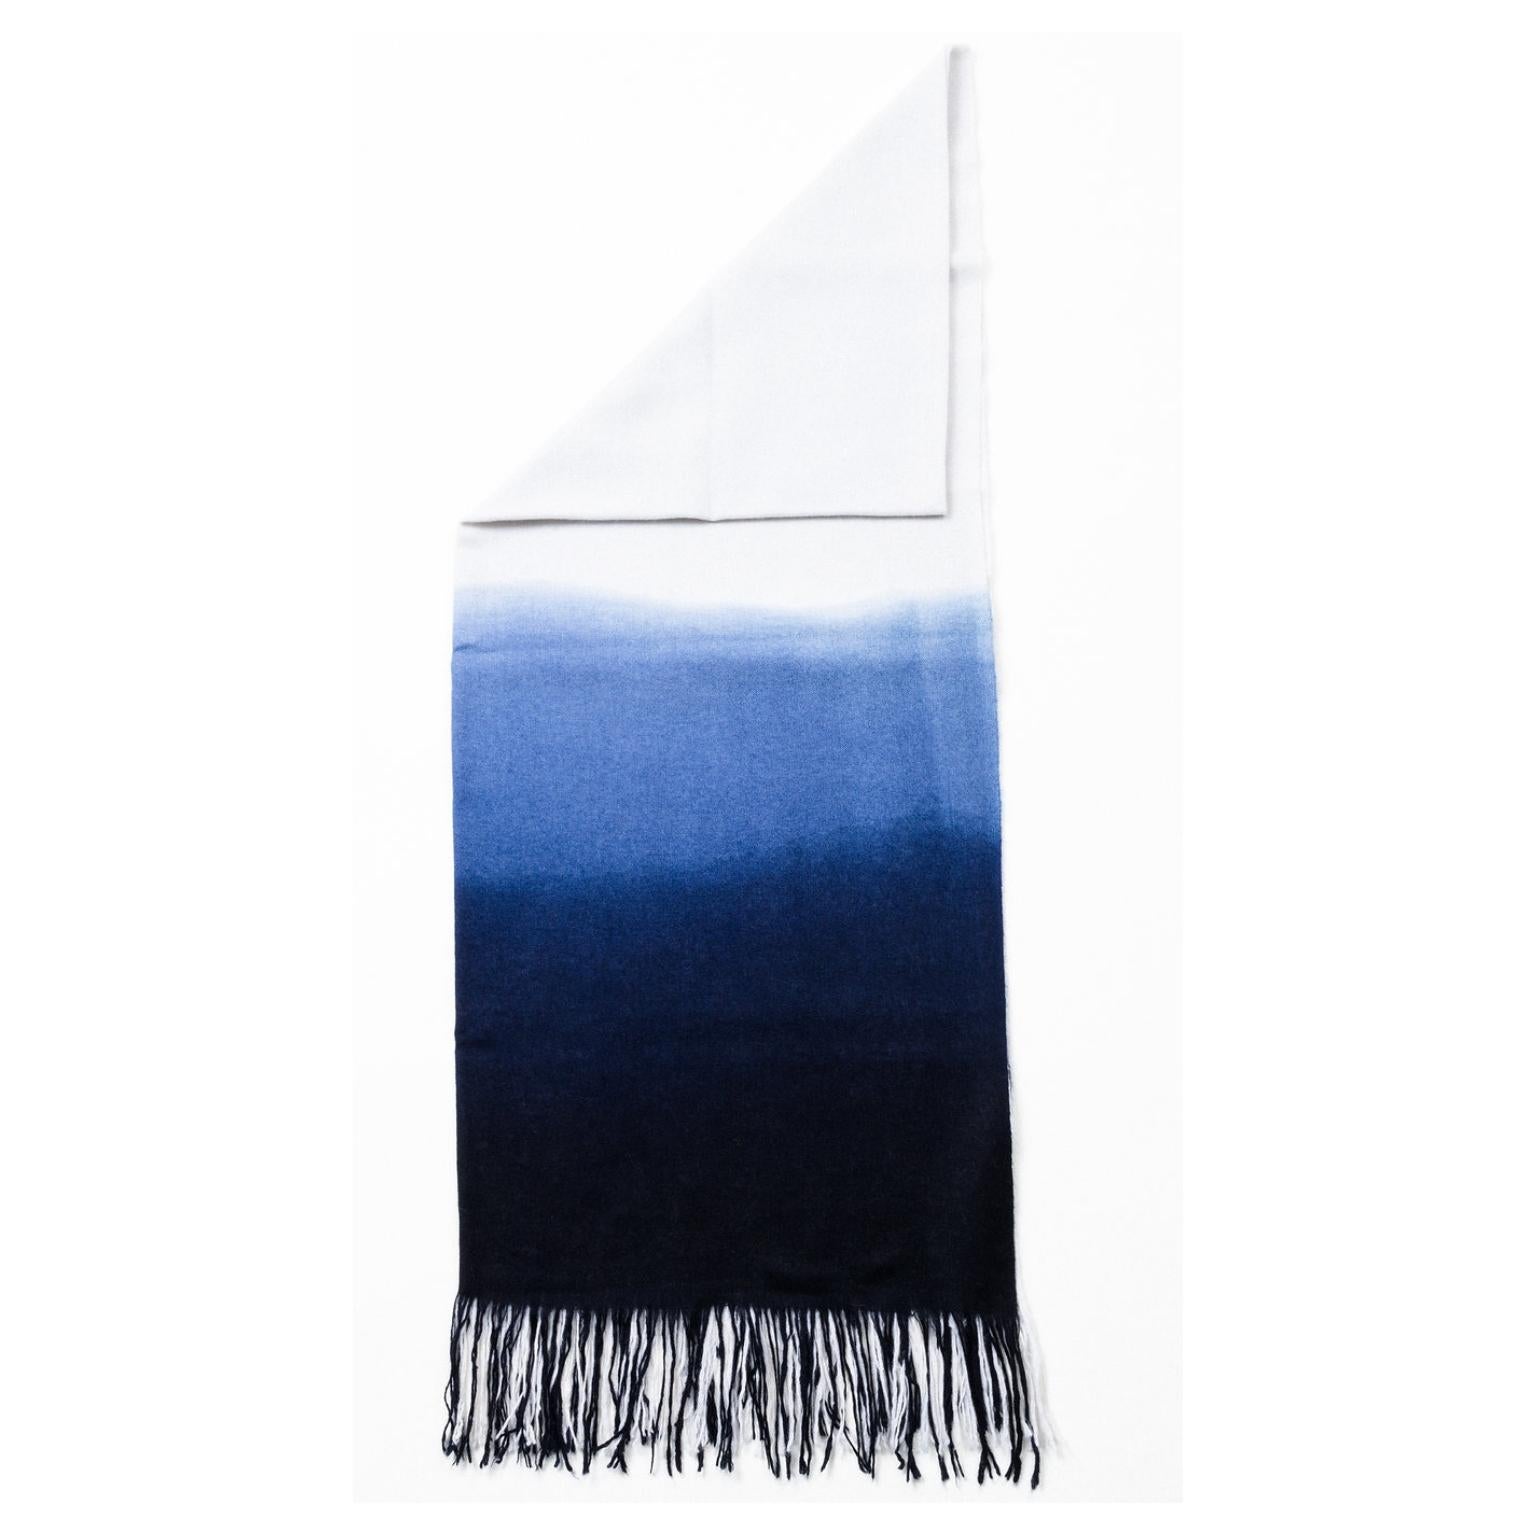 Nepalese AZURE Handloom Cashmere Light Weight Ombre Dyed Throw / Blanket  For Sale